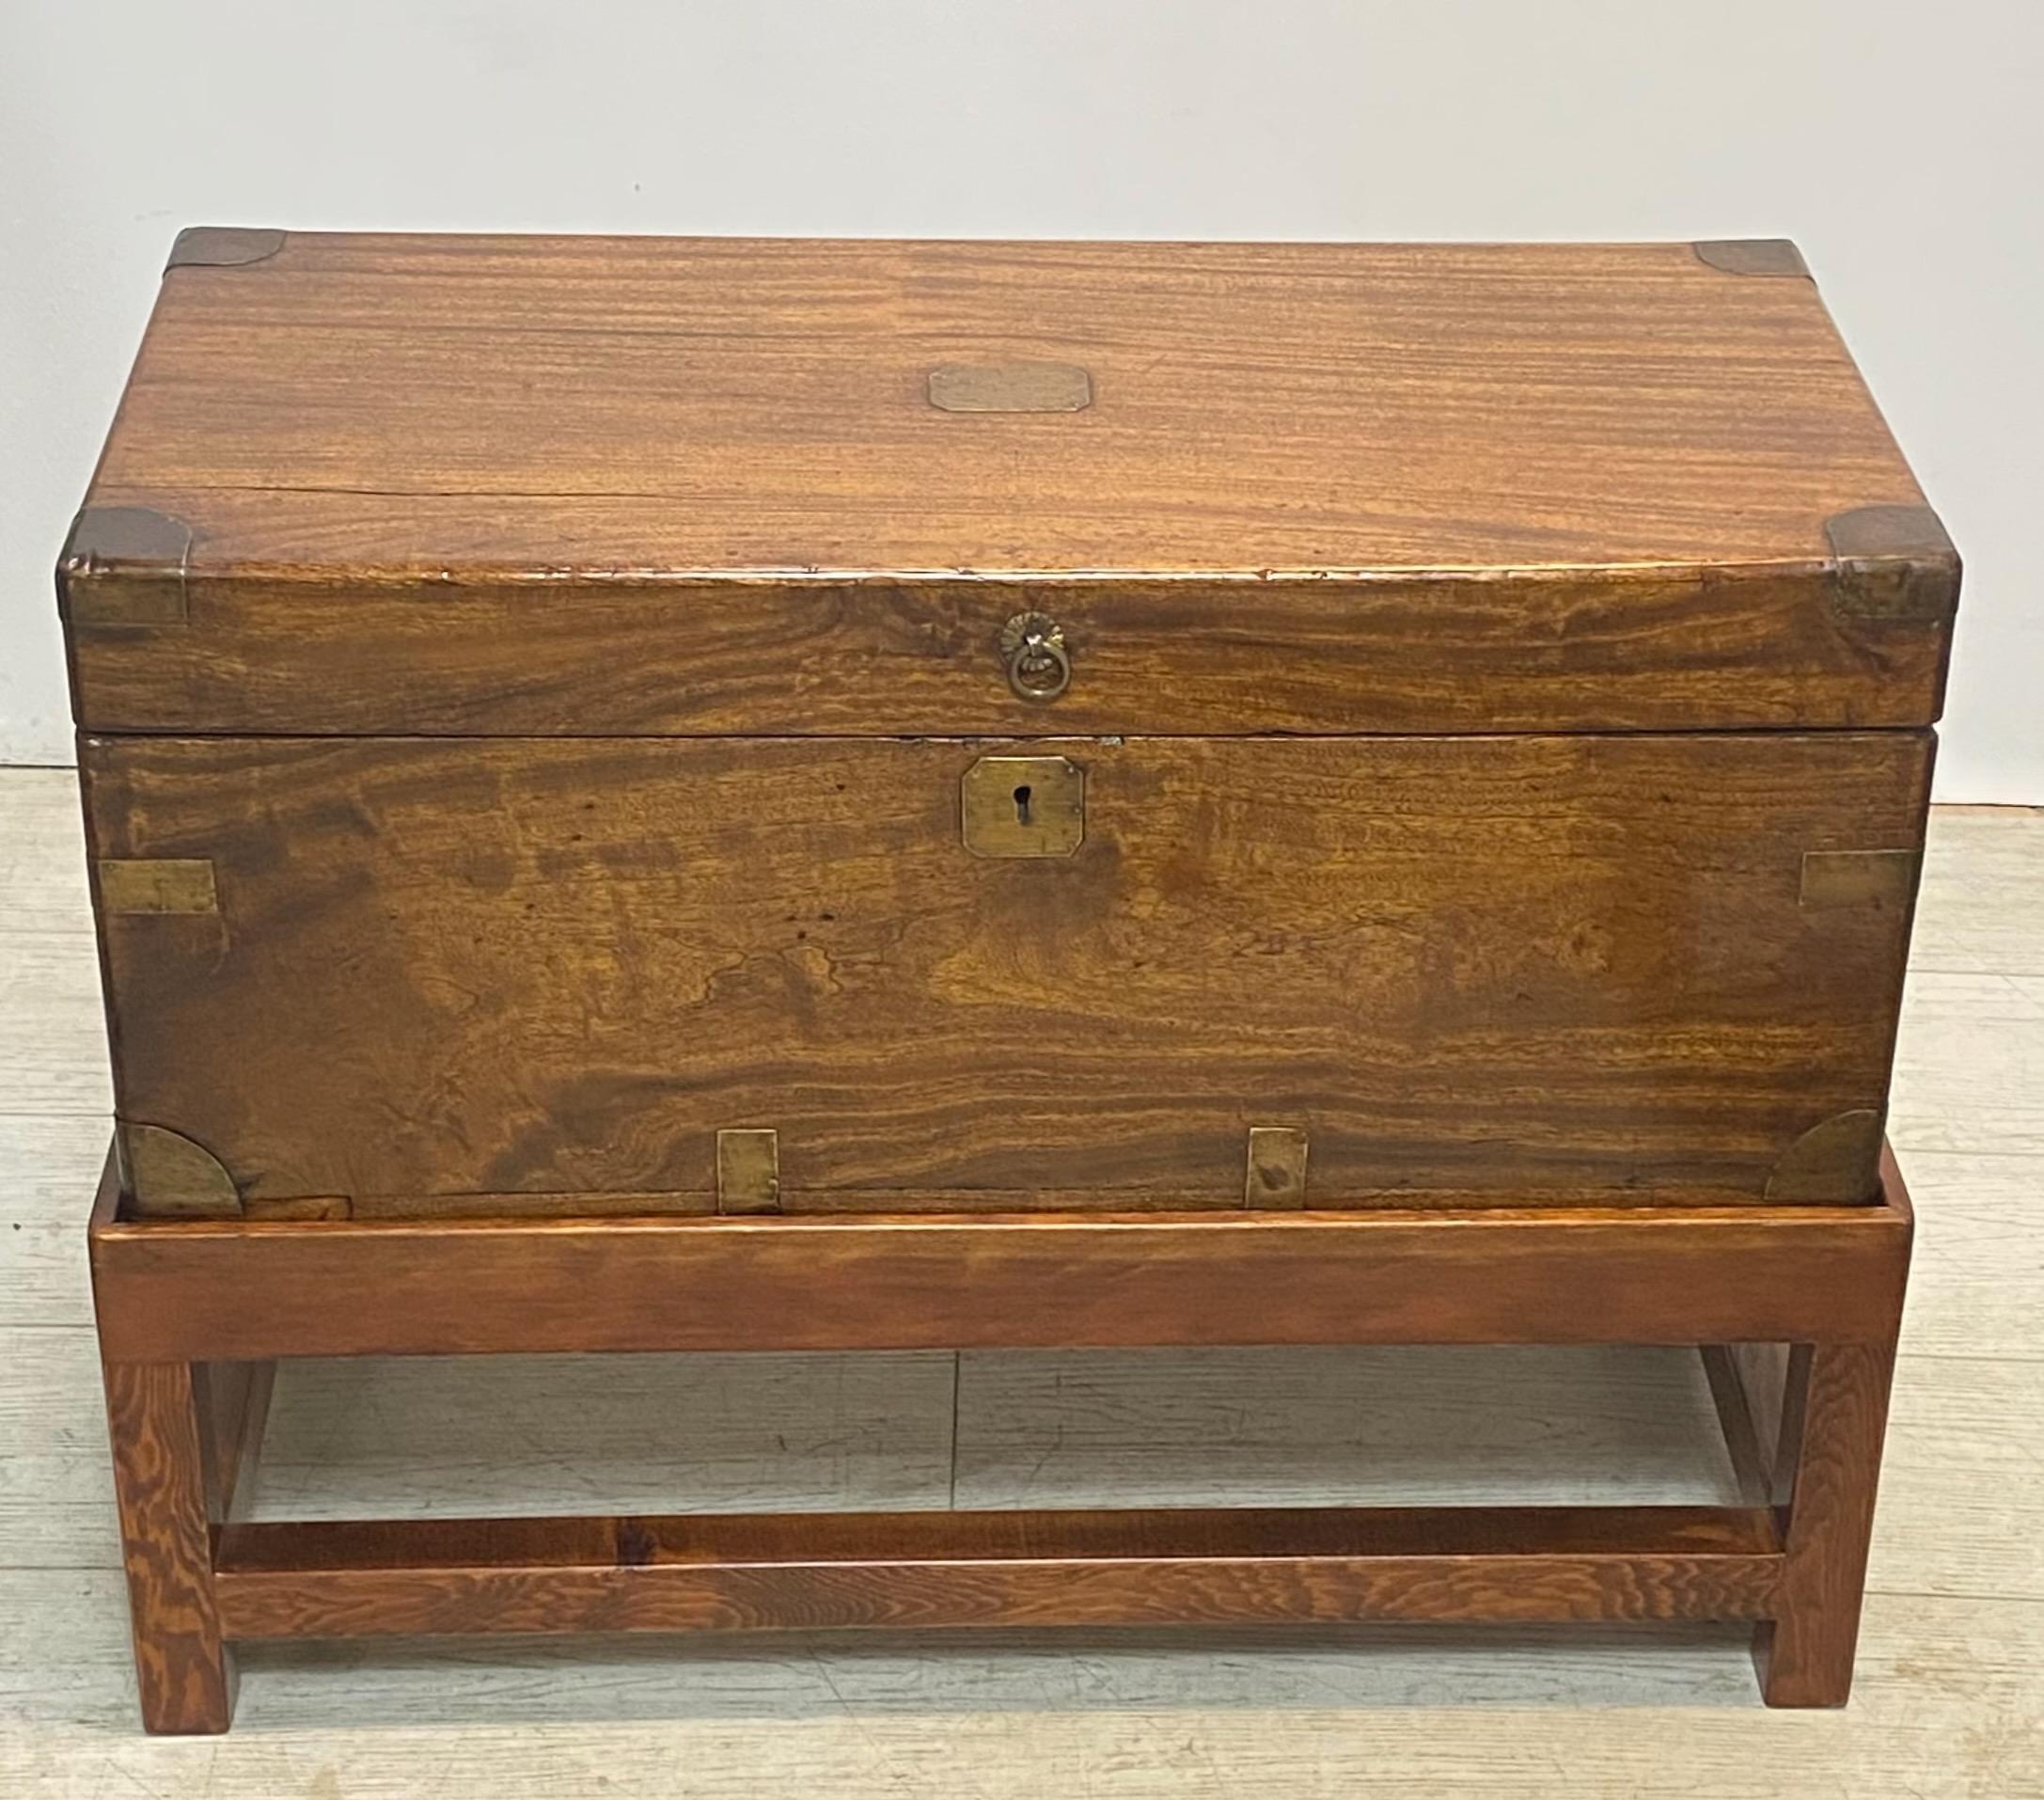 An unusual size camphor wood trunk on custom made stand with original brass straps, corners and handles, the hinged lid opening to reveal a large compartment space.
In excellent antique condition with original finish.
Ideal for use as a coffee